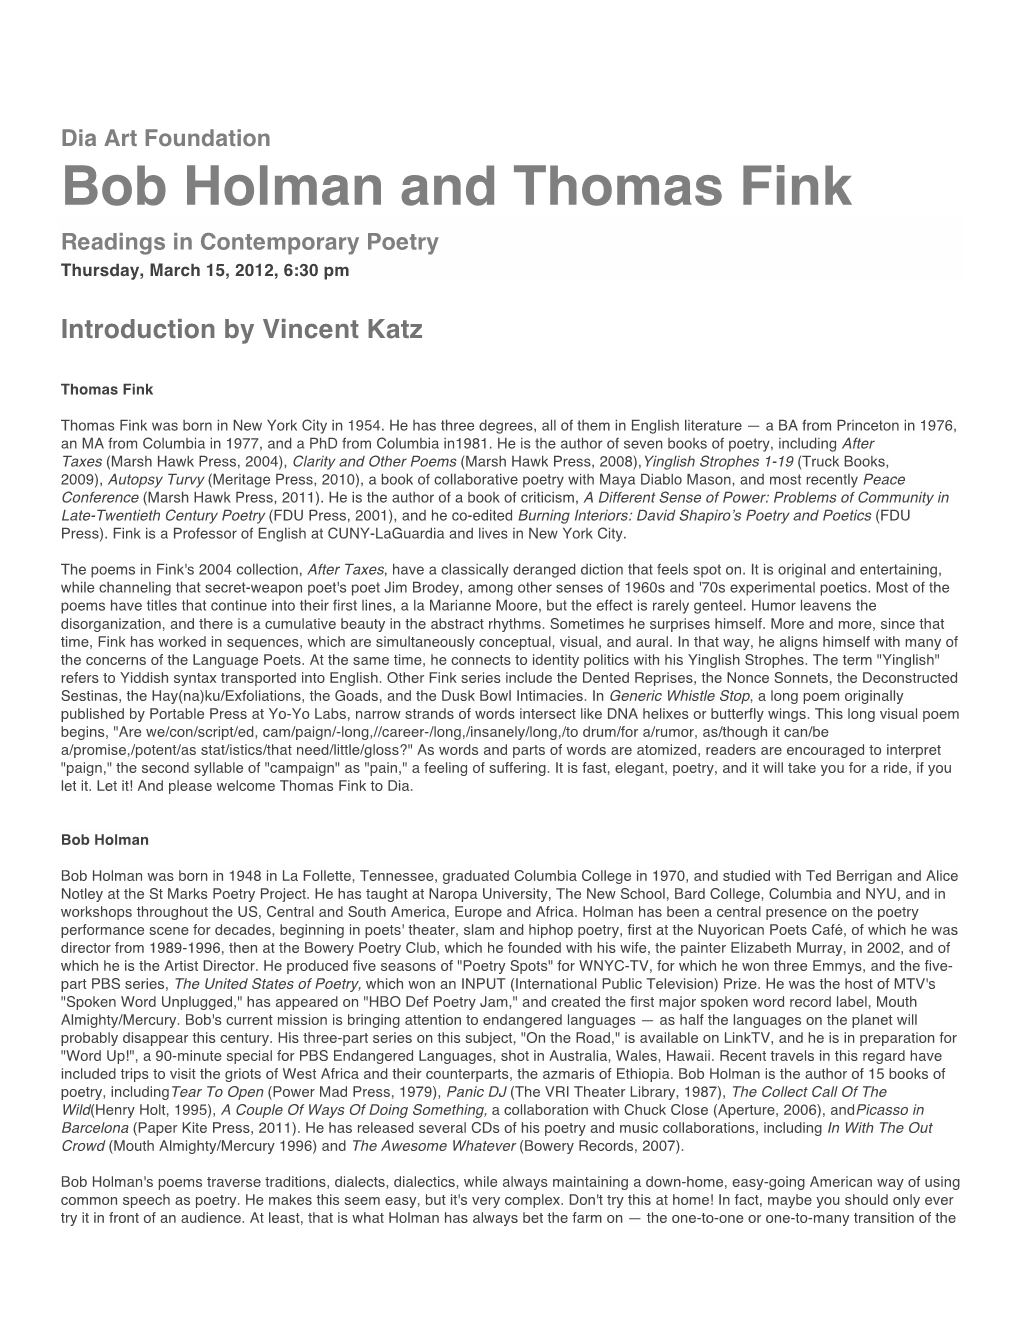 Bob Holman and Thomas Fink Readings in Contemporary Poetry Thursday, March 15, 2012, 6:30 Pm